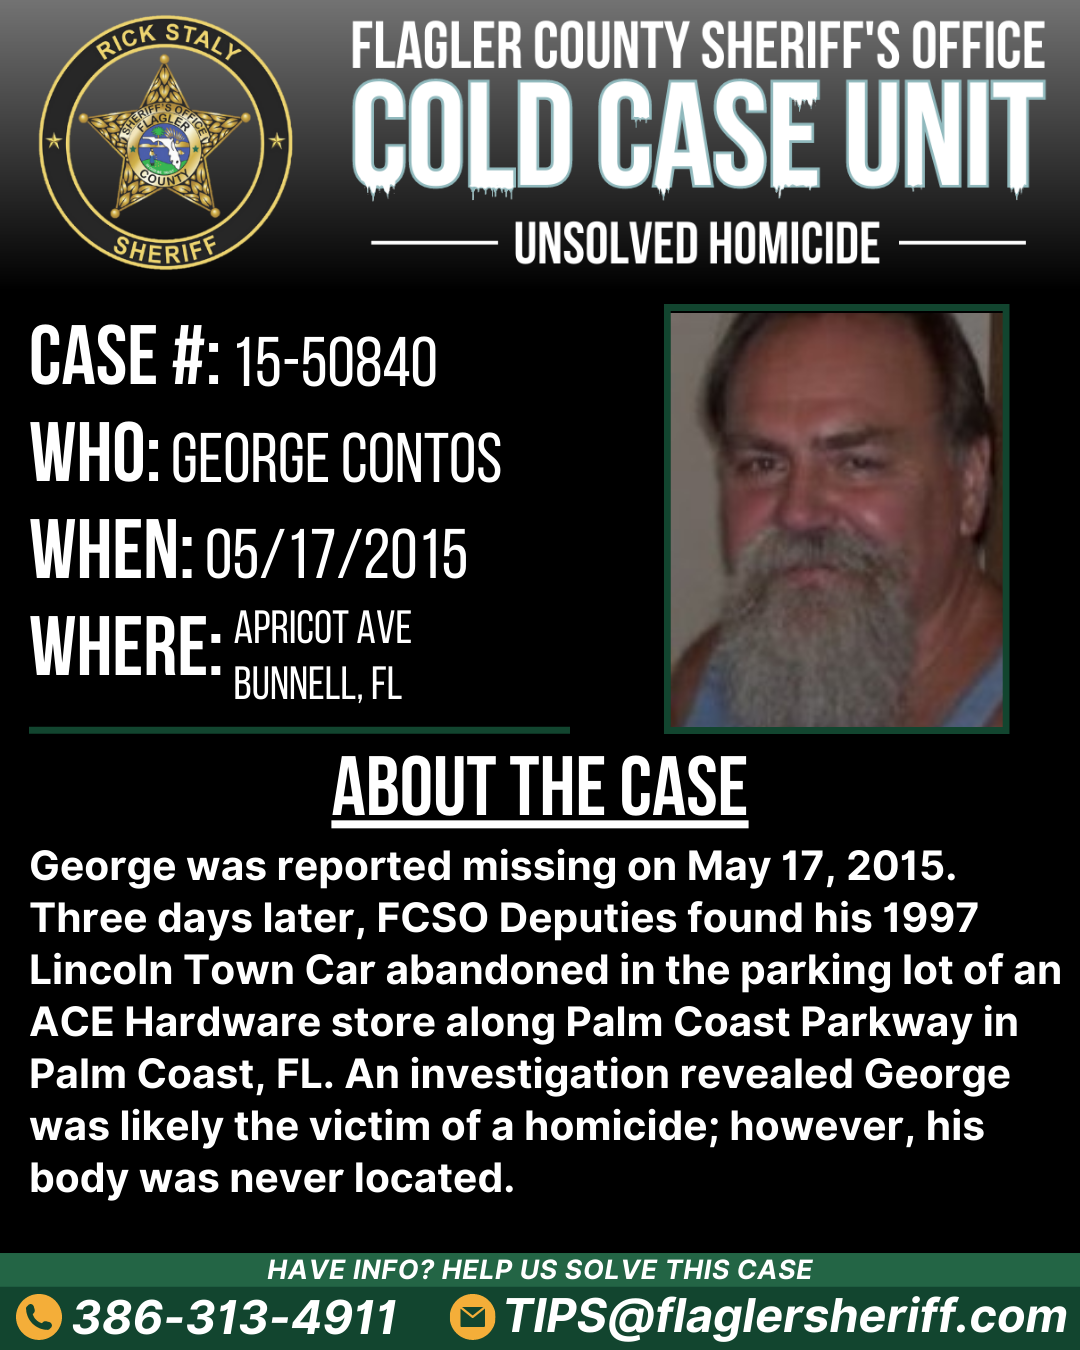 Case #15-50840. Who: George Contos. When: 05/17/2015. Where: Apricot Avenue (Bunnell, FL). About the case: George was reported missing on May 17, 2015. Three days later, FCSO Deputies found his 1997 Lincoln Town Car abandoned in the parking lot of an ACE Hardware store along Palm Coast Parkway in Palm Coast, FL. An investigation revealed George was likely the victim of a homicide; however, his body was never located.